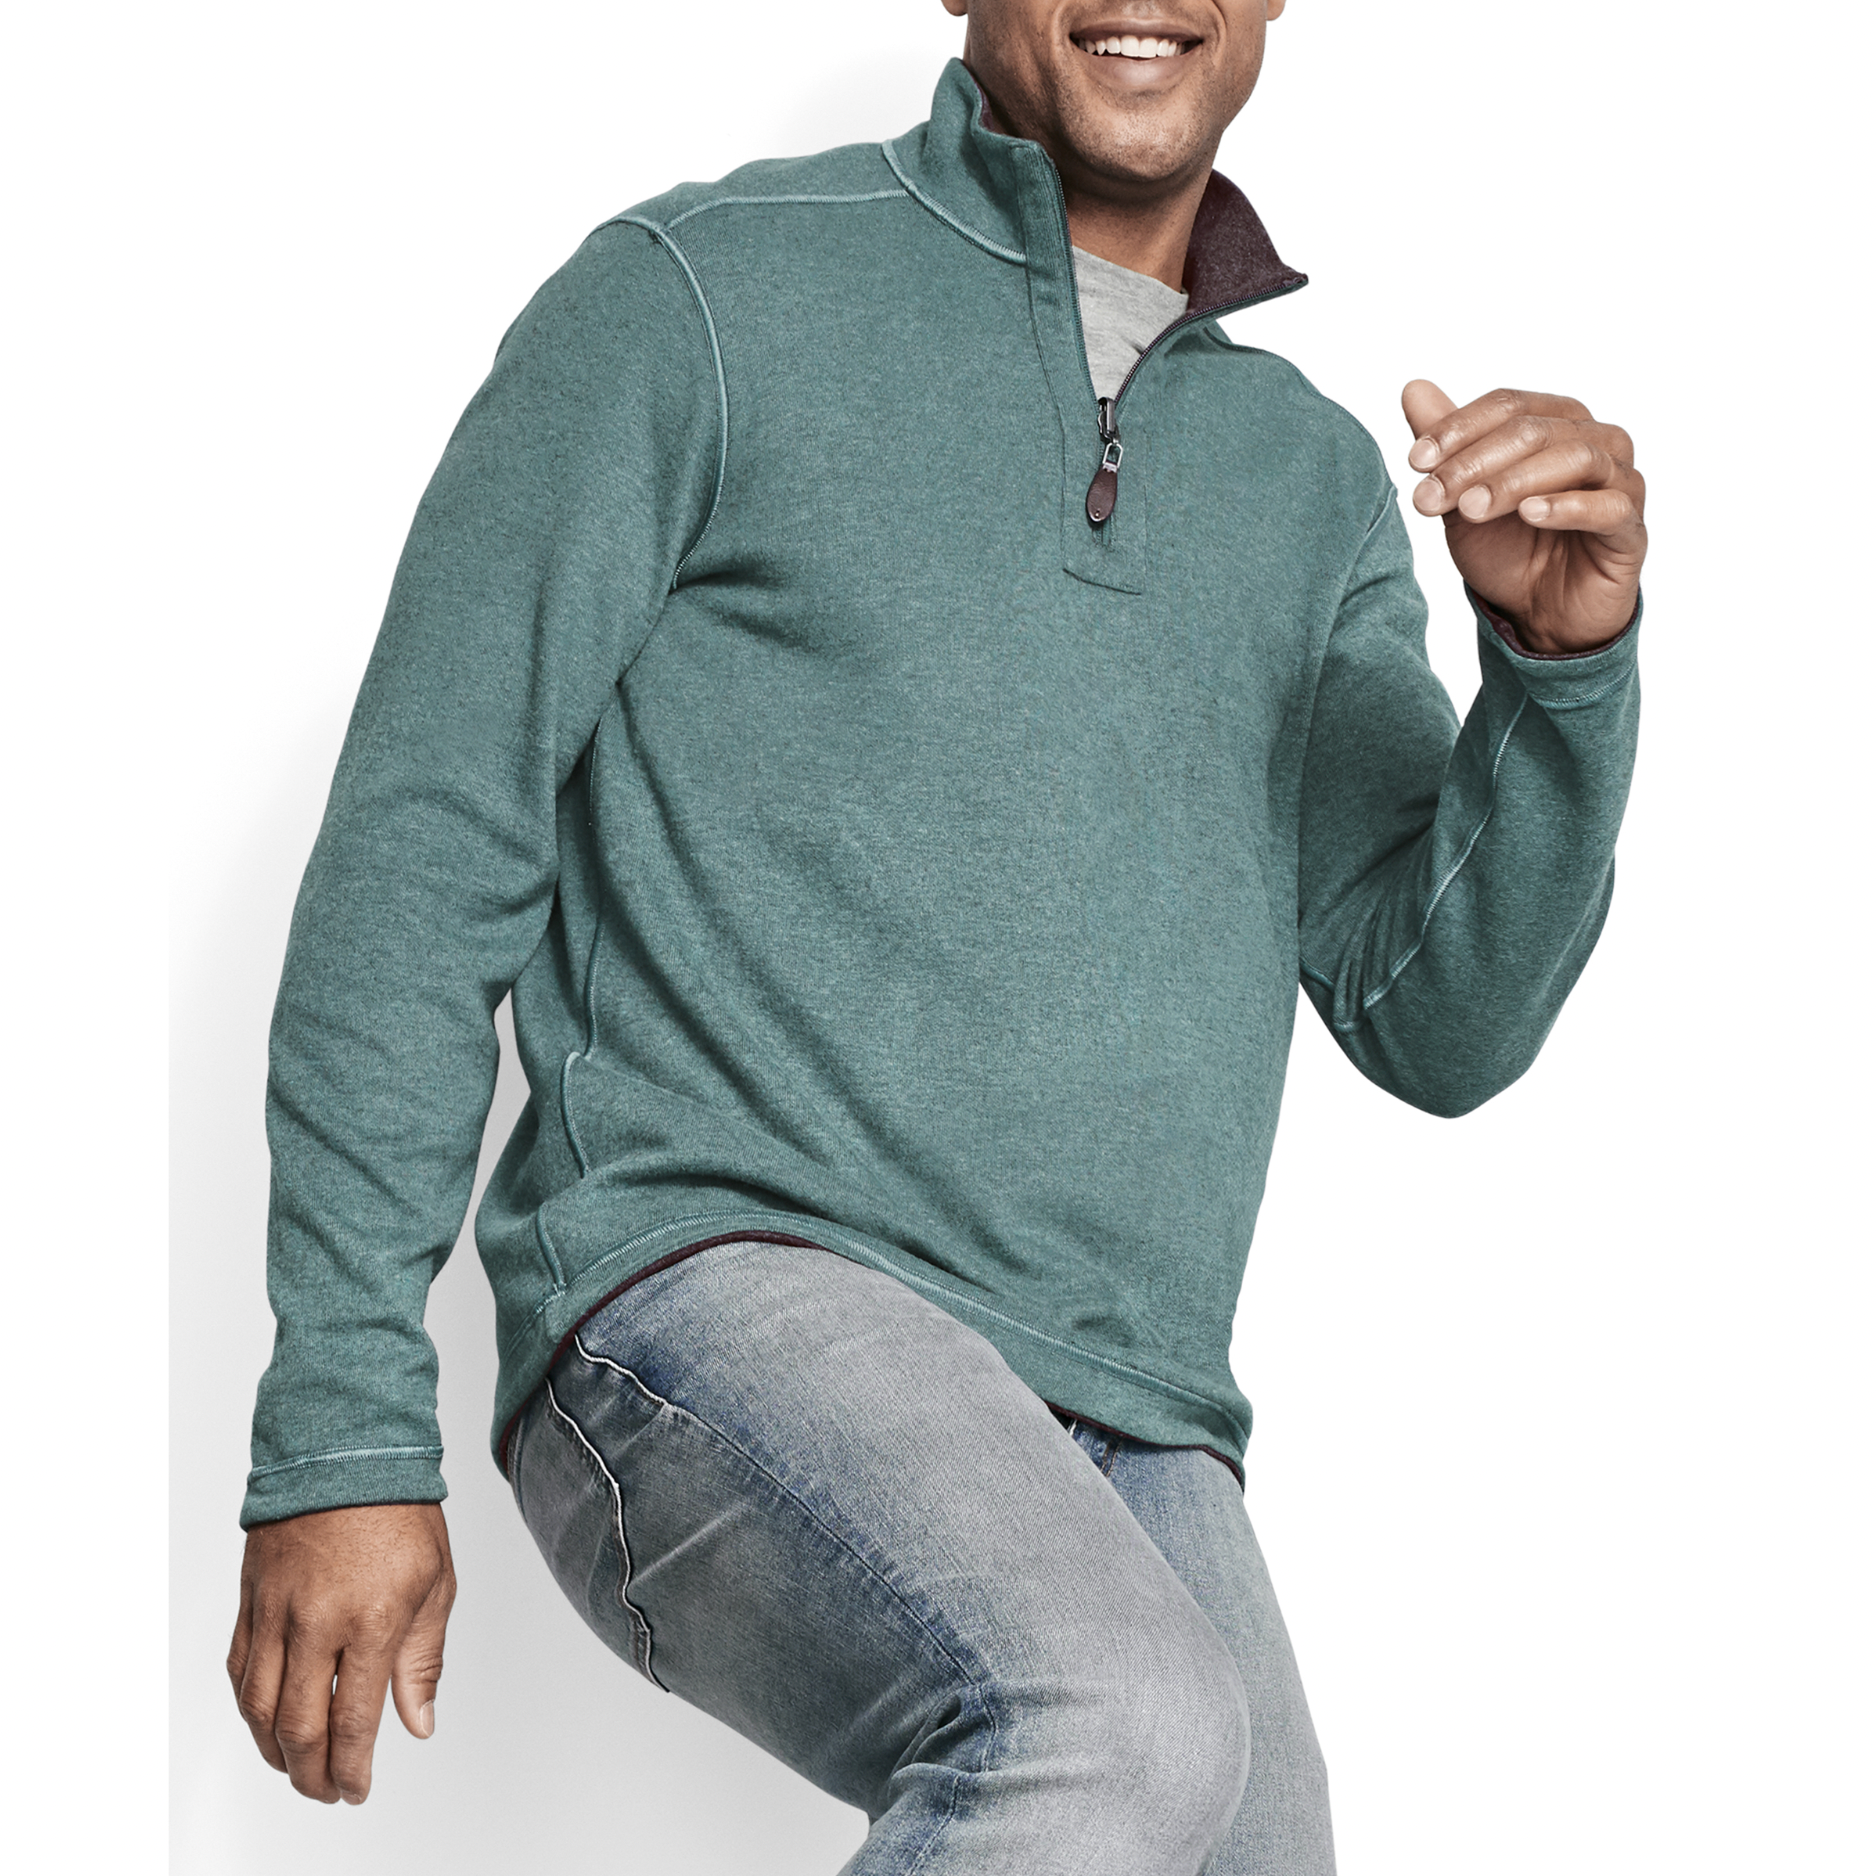 Stay warm and stylish in Johnston & Murphy's 1/4 Zip Fleece. With exceptional quality and a modern design, it'll fit right into your wardrobe while keeping you cozy.